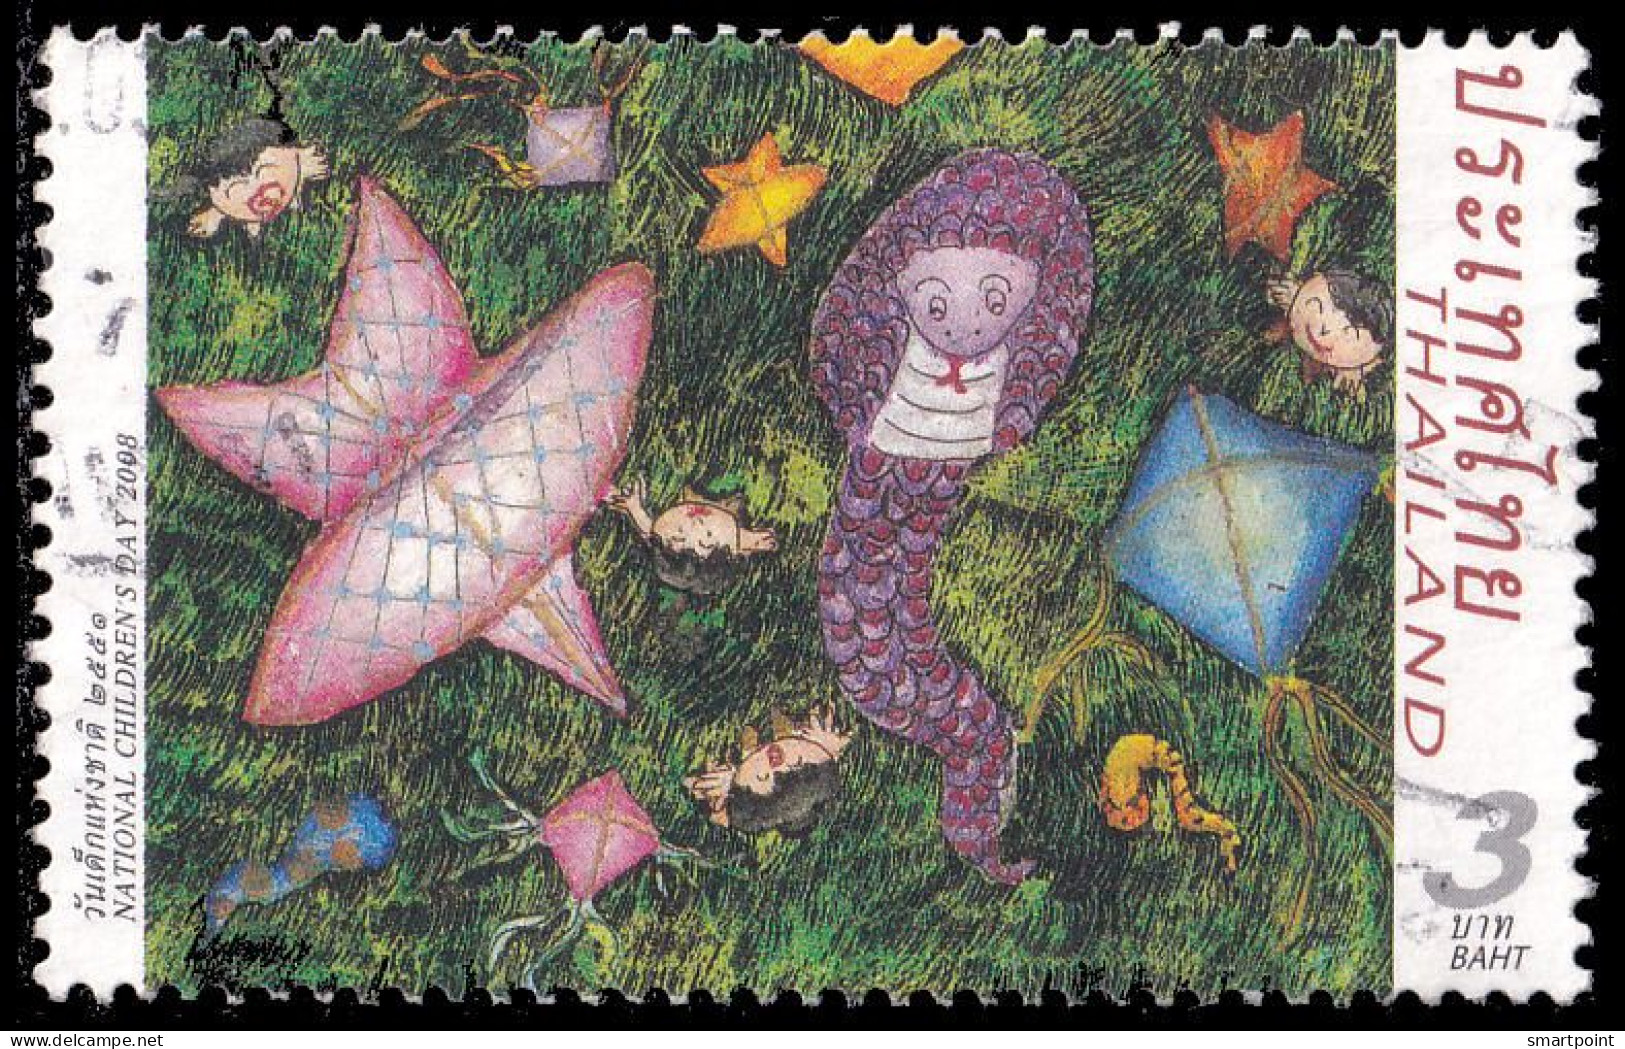 Thailand Stamp 2008 National Children's Day 3 Baht - Used - Thailand